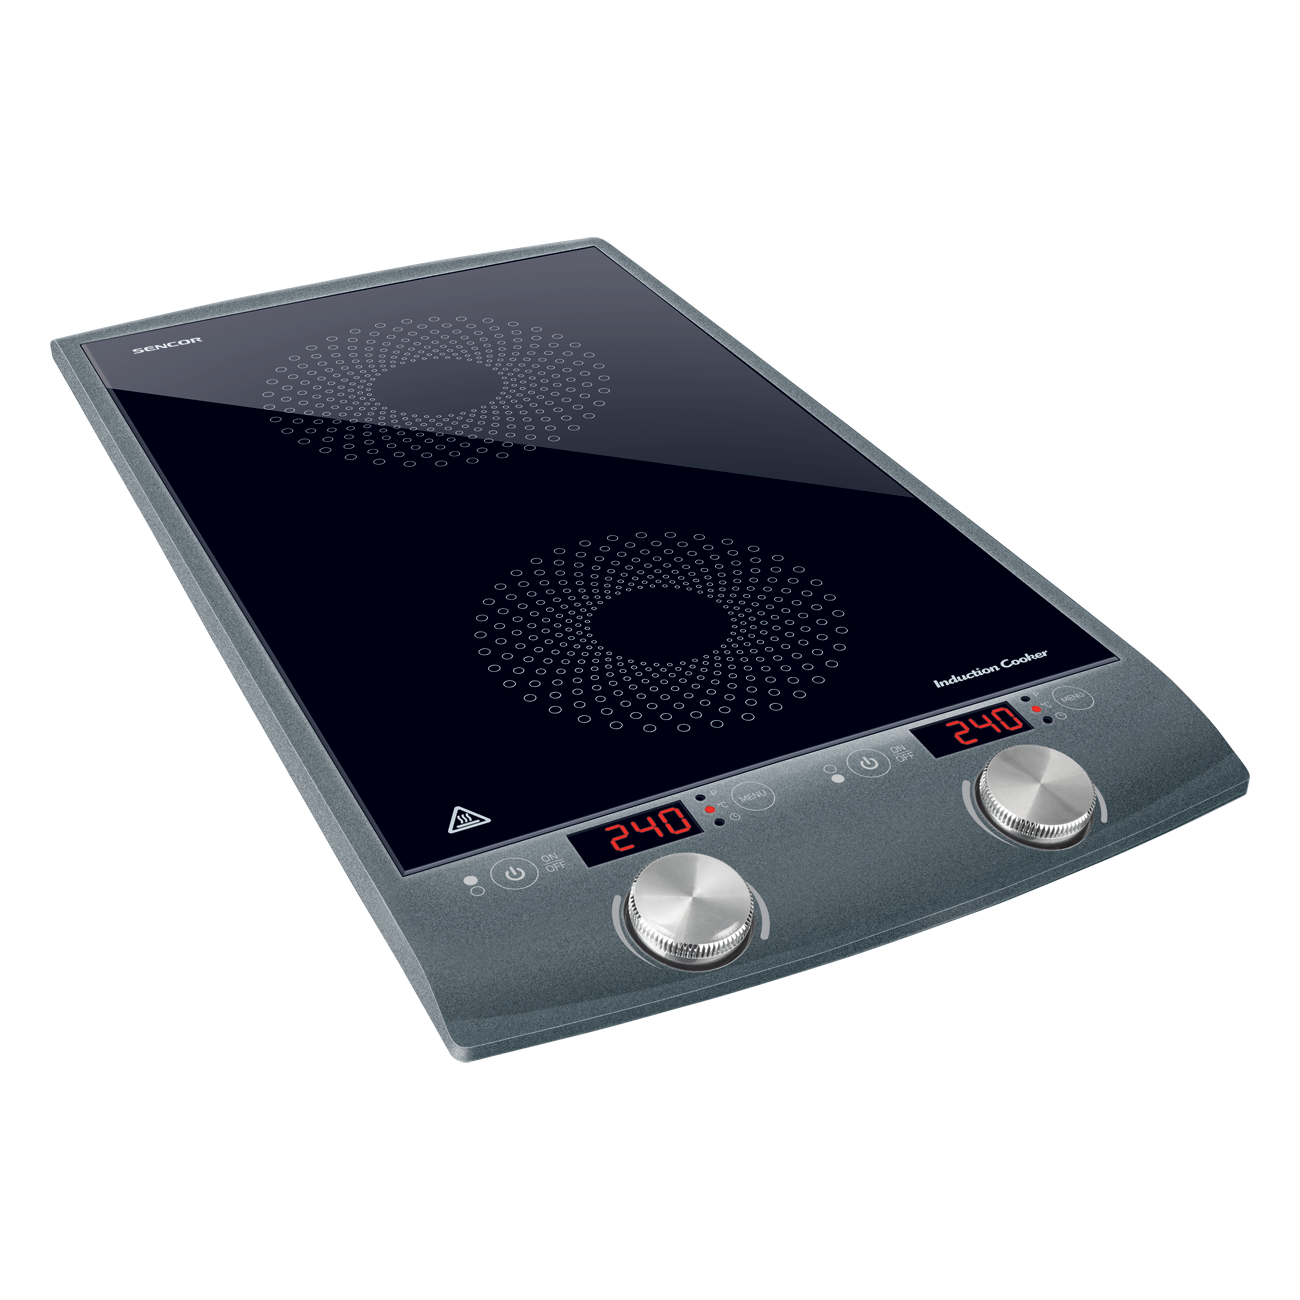 Induction cooker SENCOR - SCP 4202 GY